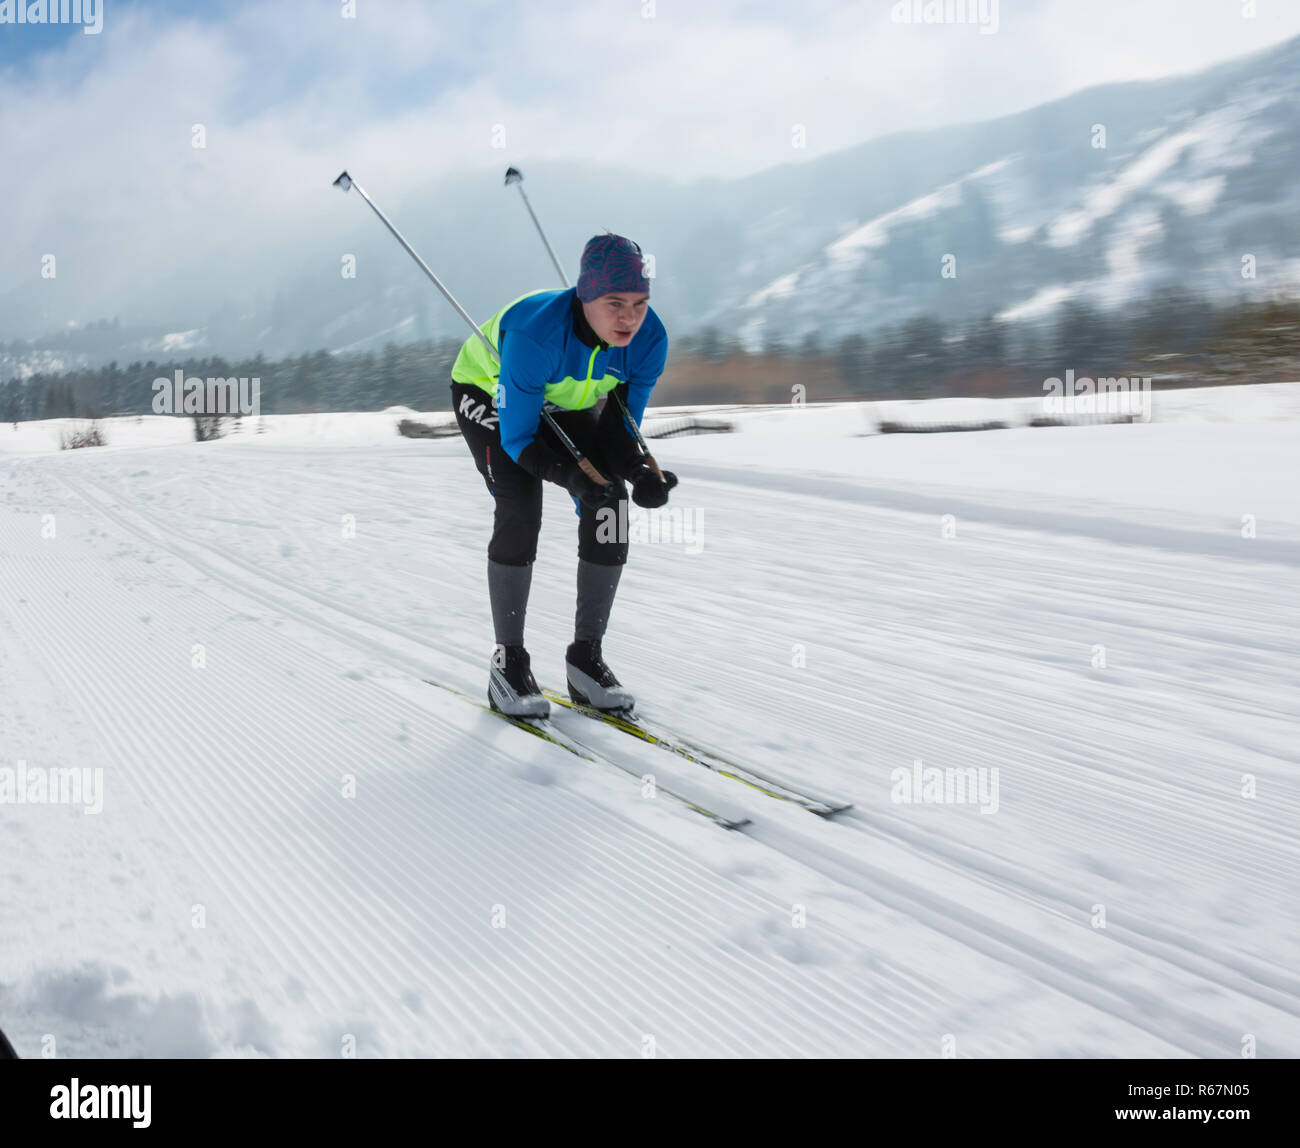 ALMATY, KAZAKHSTAN - FEBRUARY 18, 2017: amateur competitions in the discipline of cross-country skiing, under the name of ARBA Ski Fest. A man cross-c Stock Photo